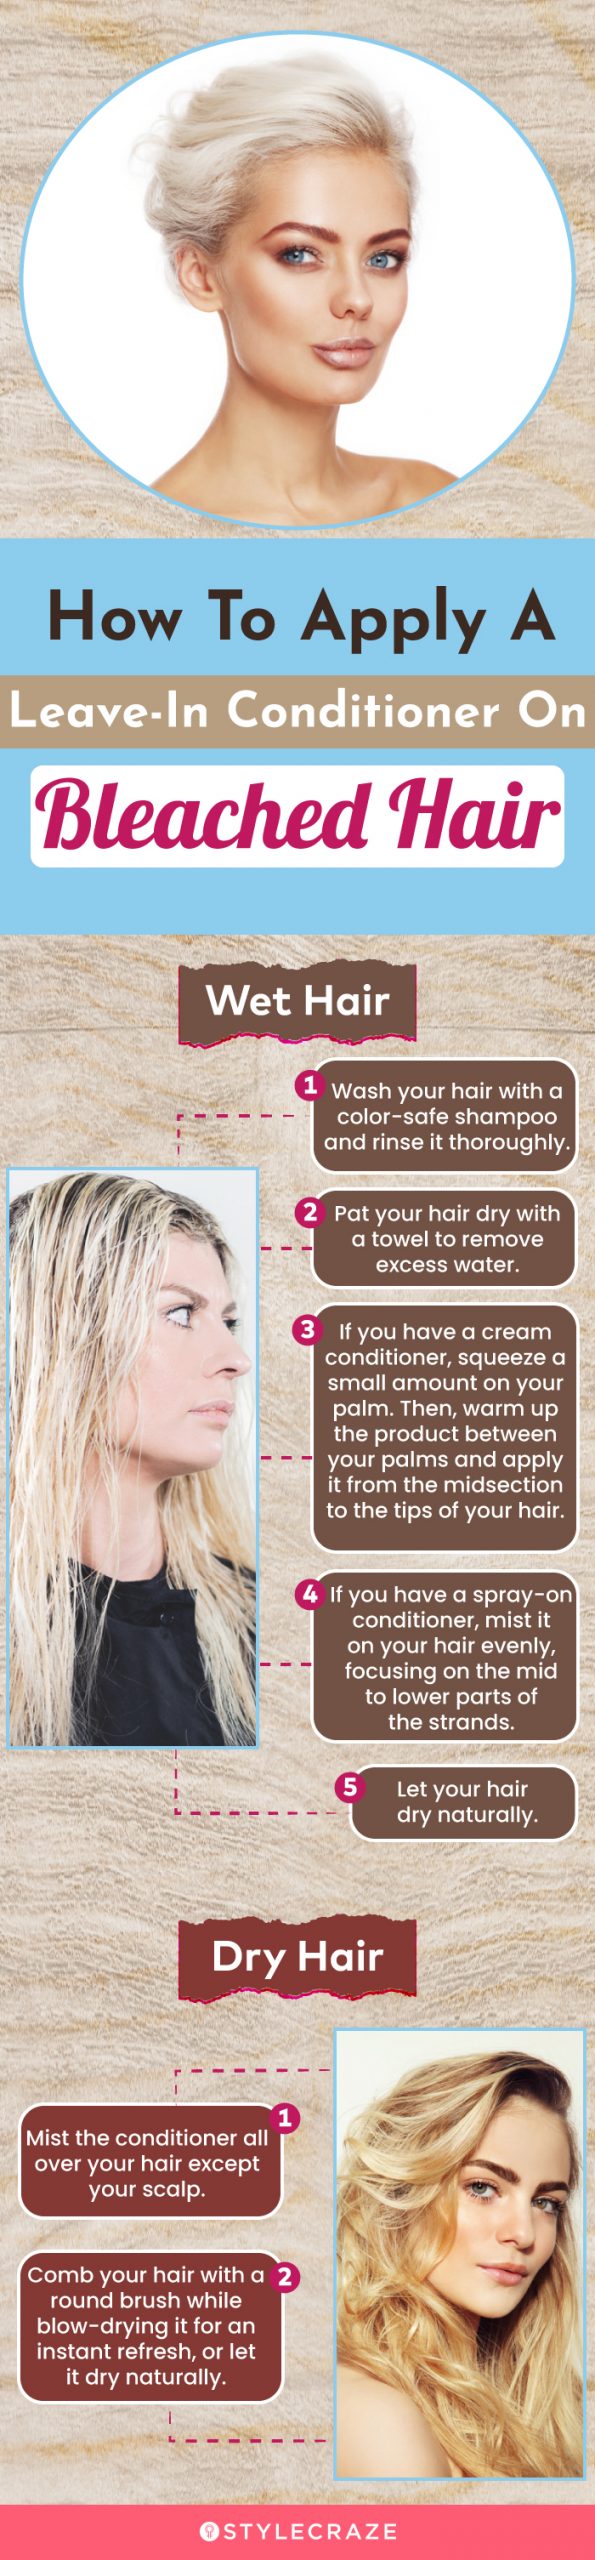 How To Apply A Leave-In Conditioner On Bleached Hair (infographic)